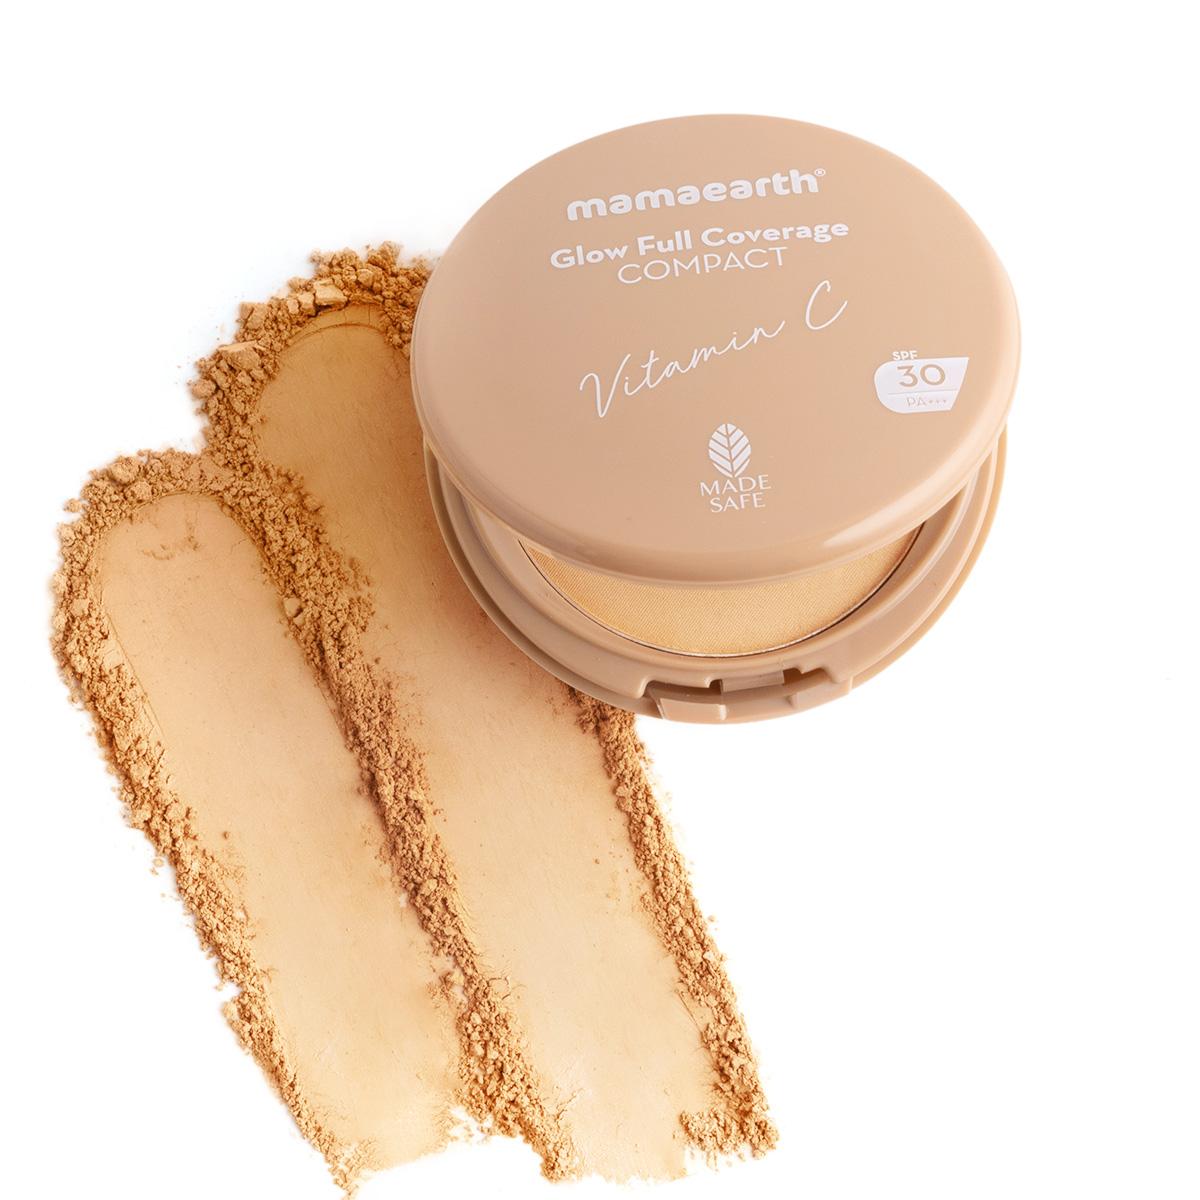 glow full coverage compact with spf 30 - 9g | natural glow